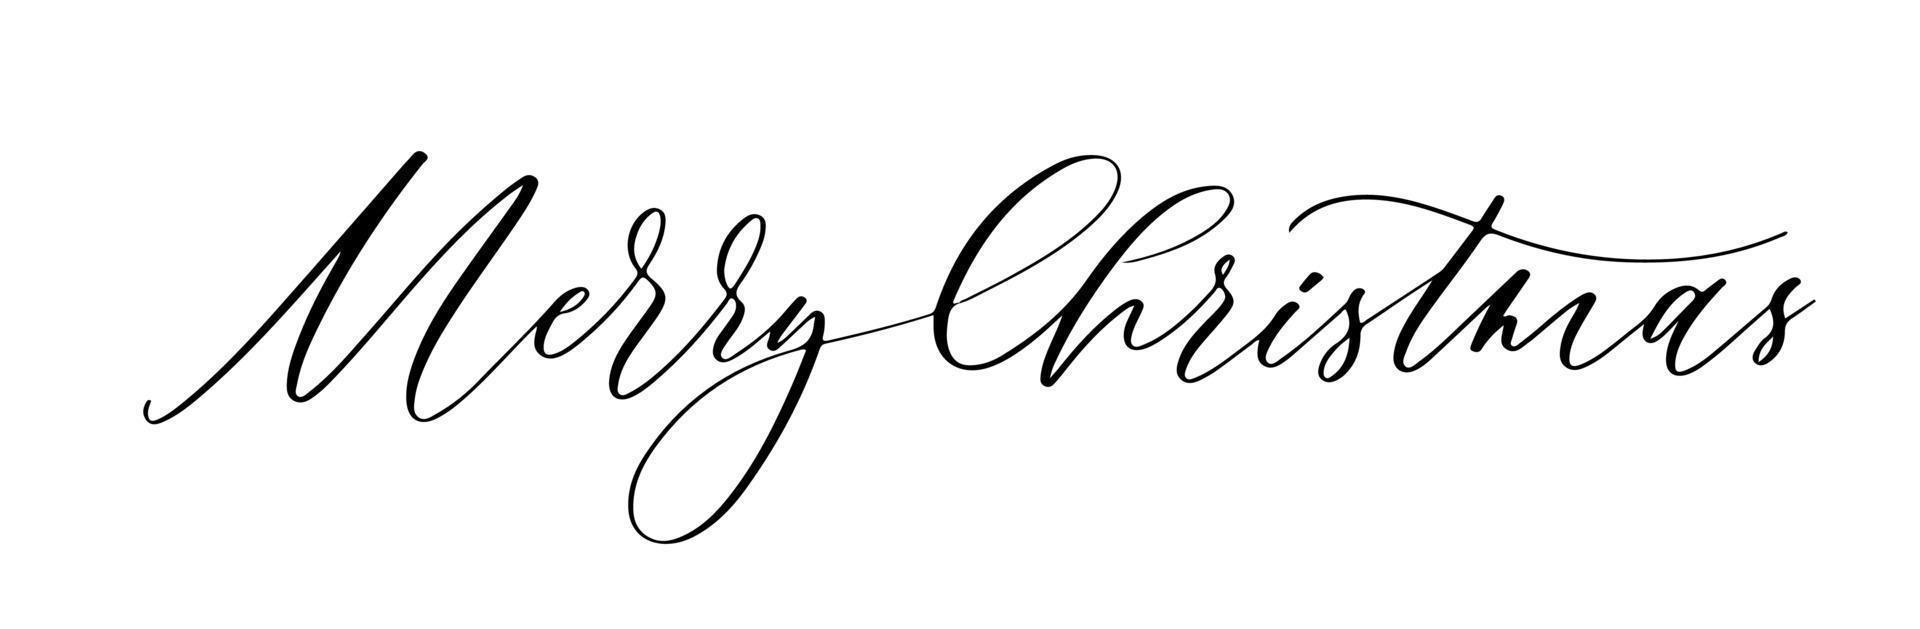 Merry Christmas vector brush lettering. Hand drawn modern brush calligraphy isolated on white background. Creative typography for Holiday greeting cards, banner.